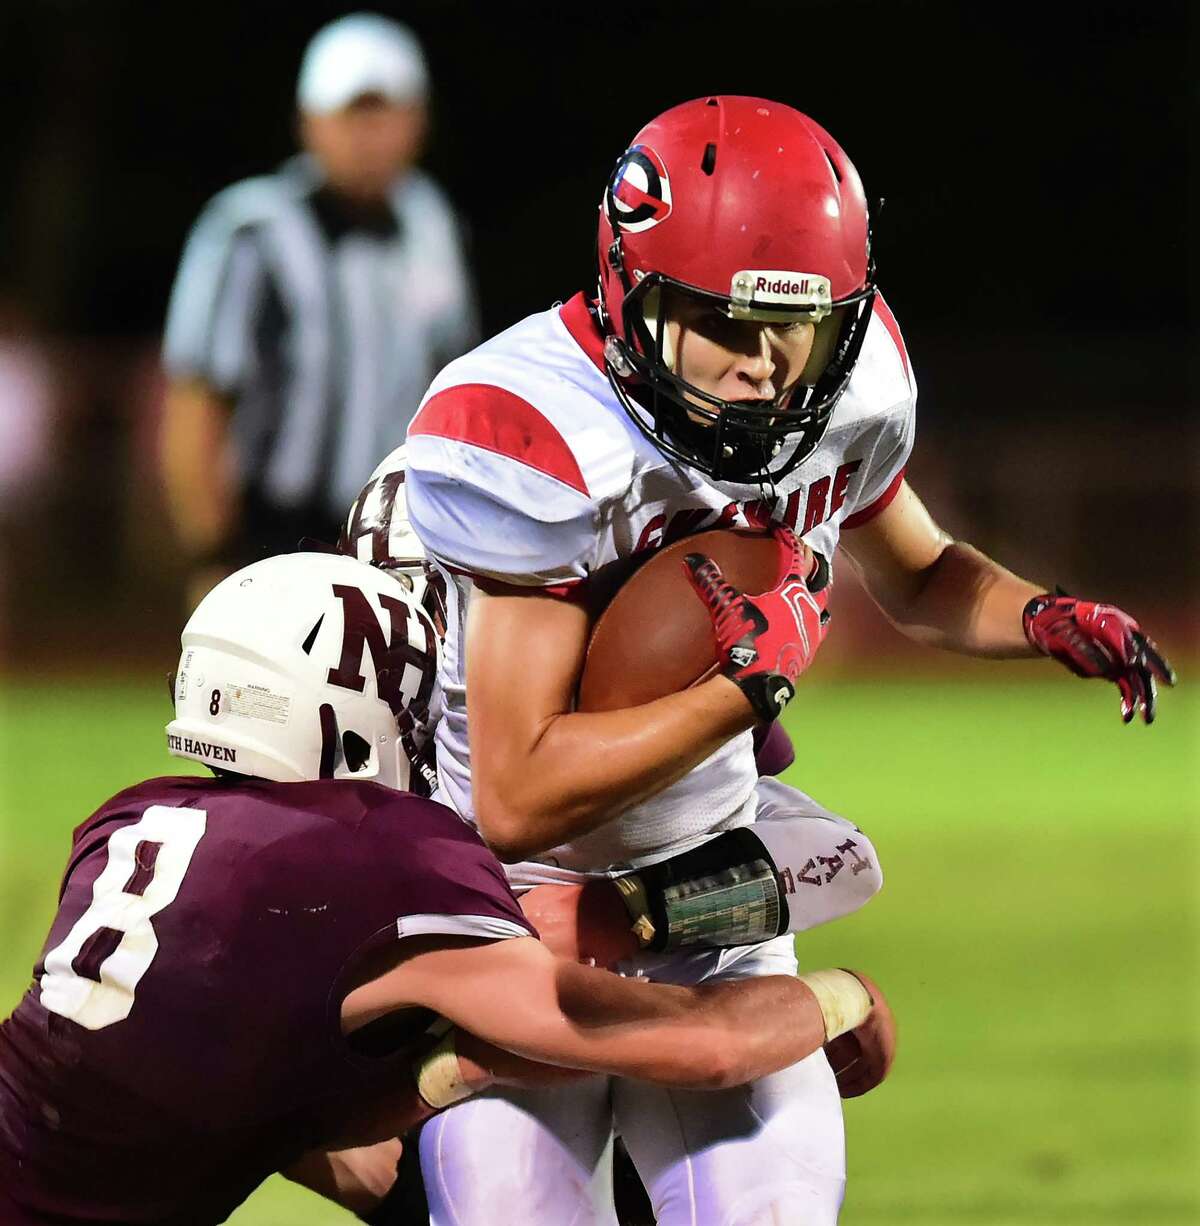 Cheshire junior wide receiver Tommy Wnuck fights off North Haven’s Tom Dodge (8) and Zack Orth (33) in a 24-21, on opening night of high school football, Friday, September 9, 2016, at Mike Vanacore Field at the North Haven Athletic Complex. (Catherine Avalone/New Haven Register)